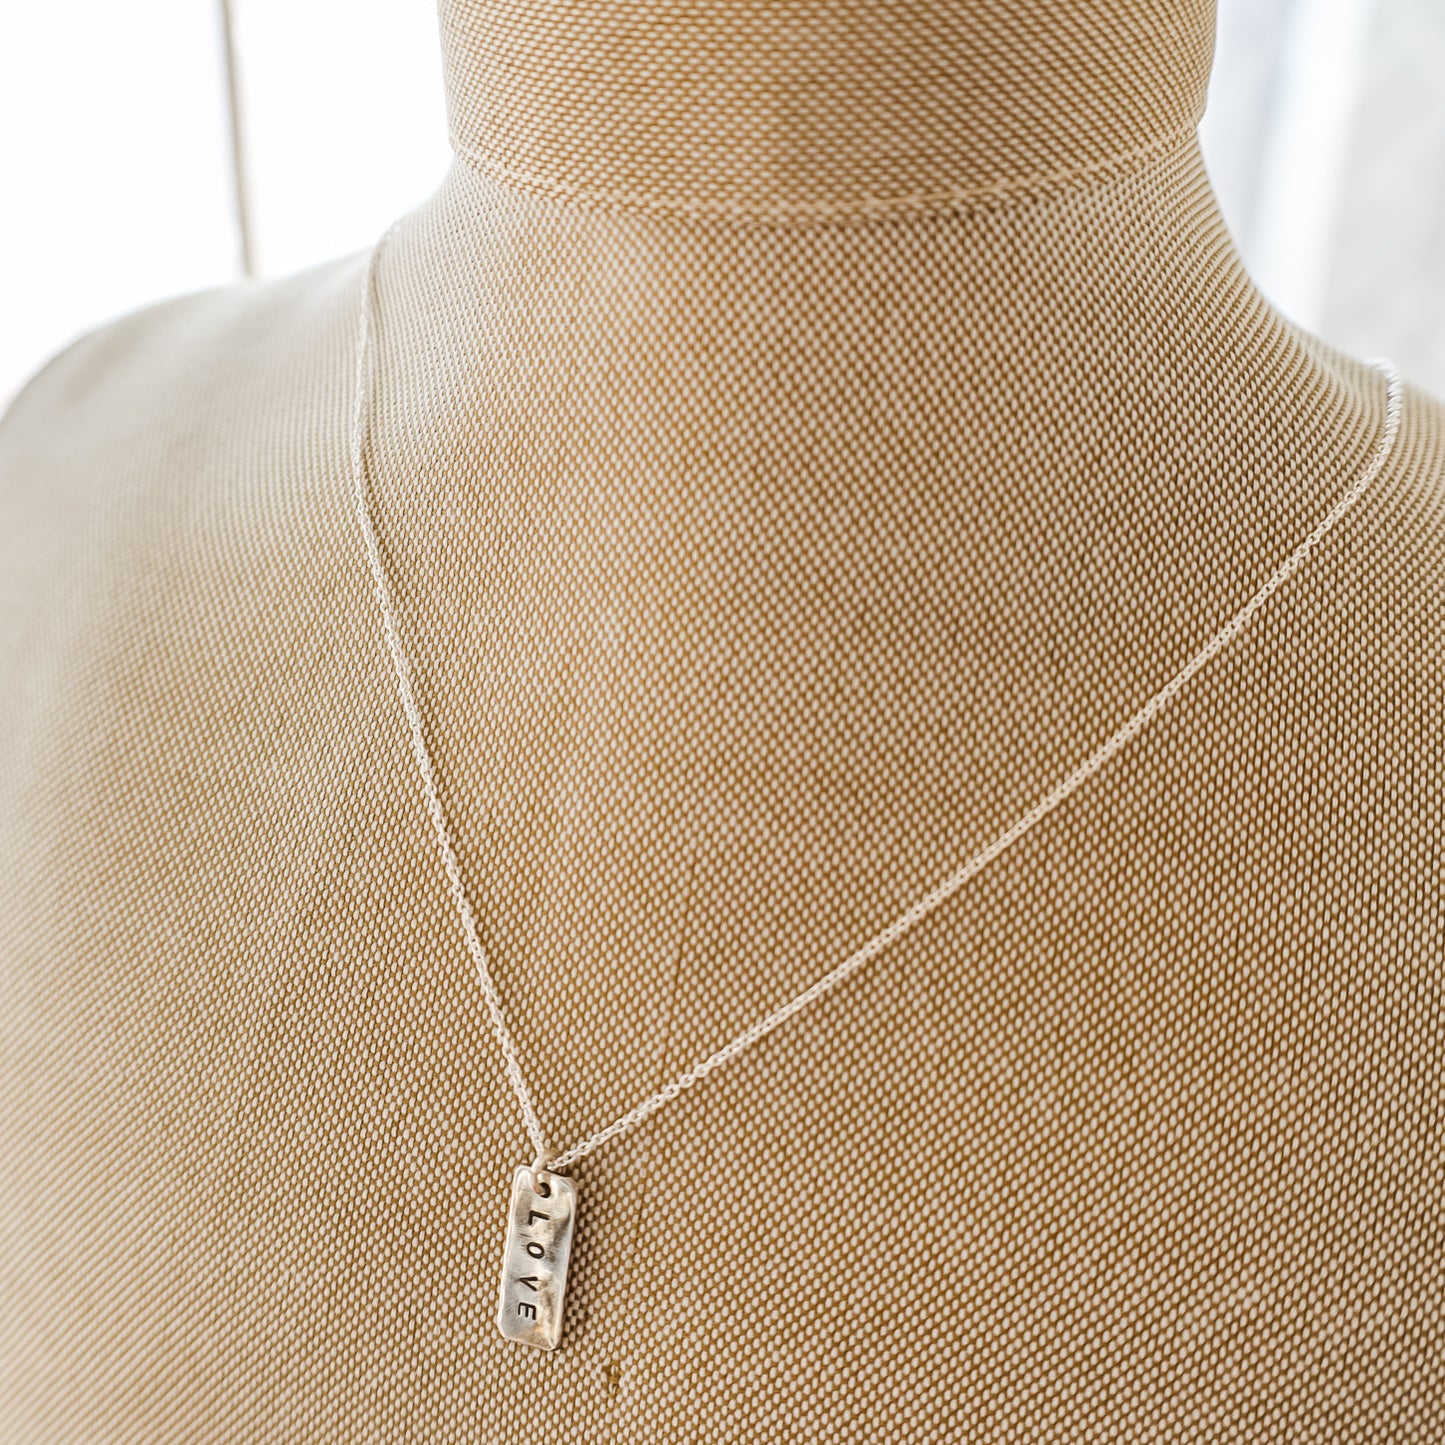 Silver Tag Love Necklace - Curated Home Decor